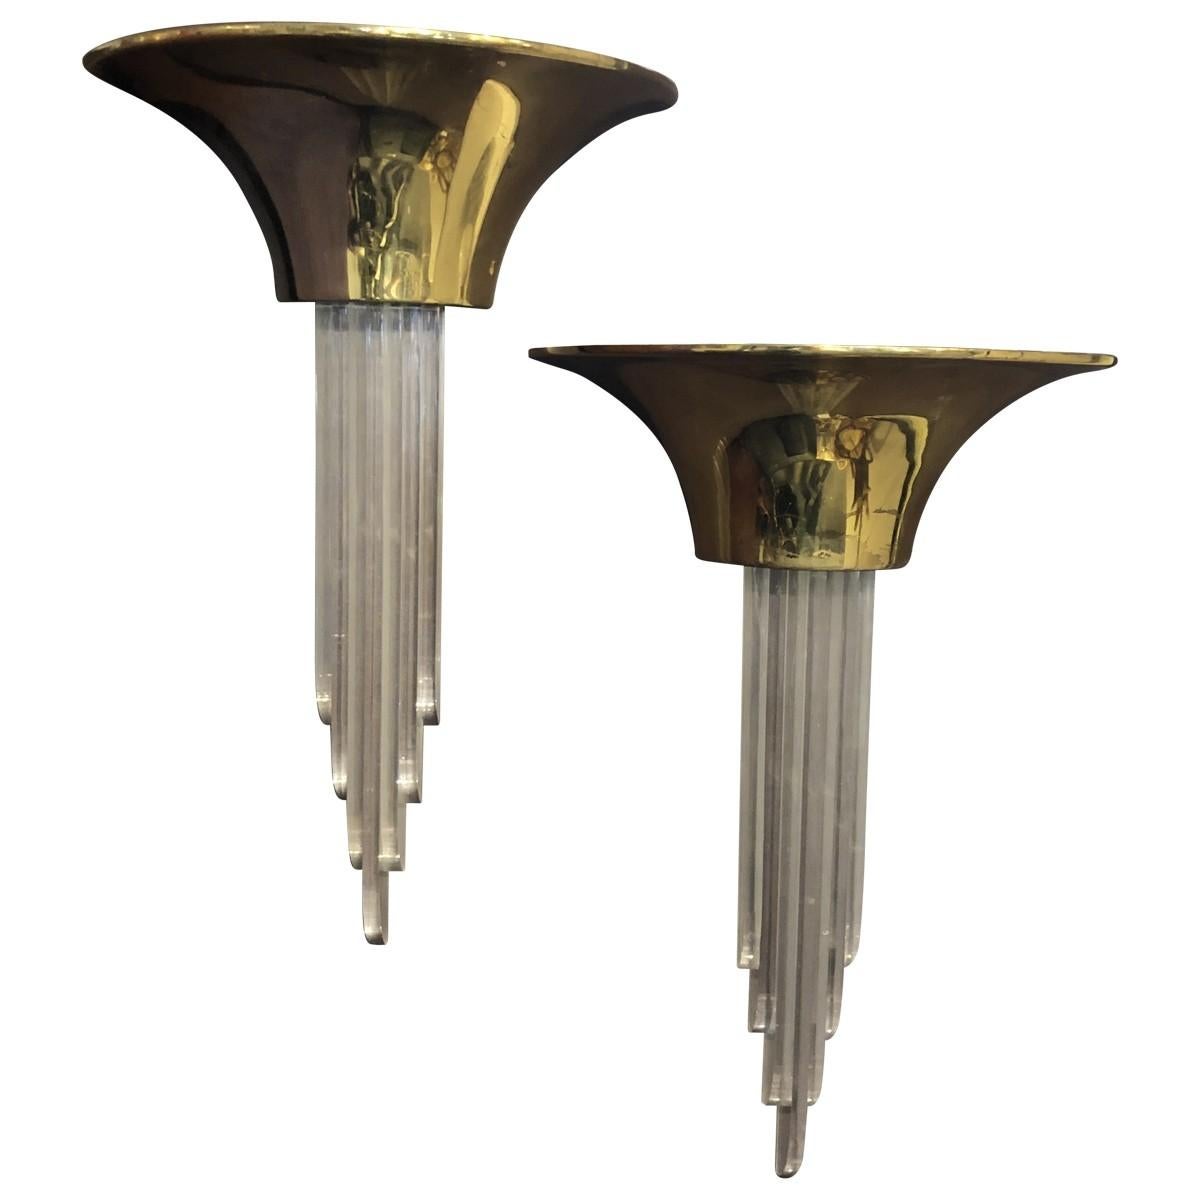 Karl Springer Purcell Demilune Wall Sconces For Sale